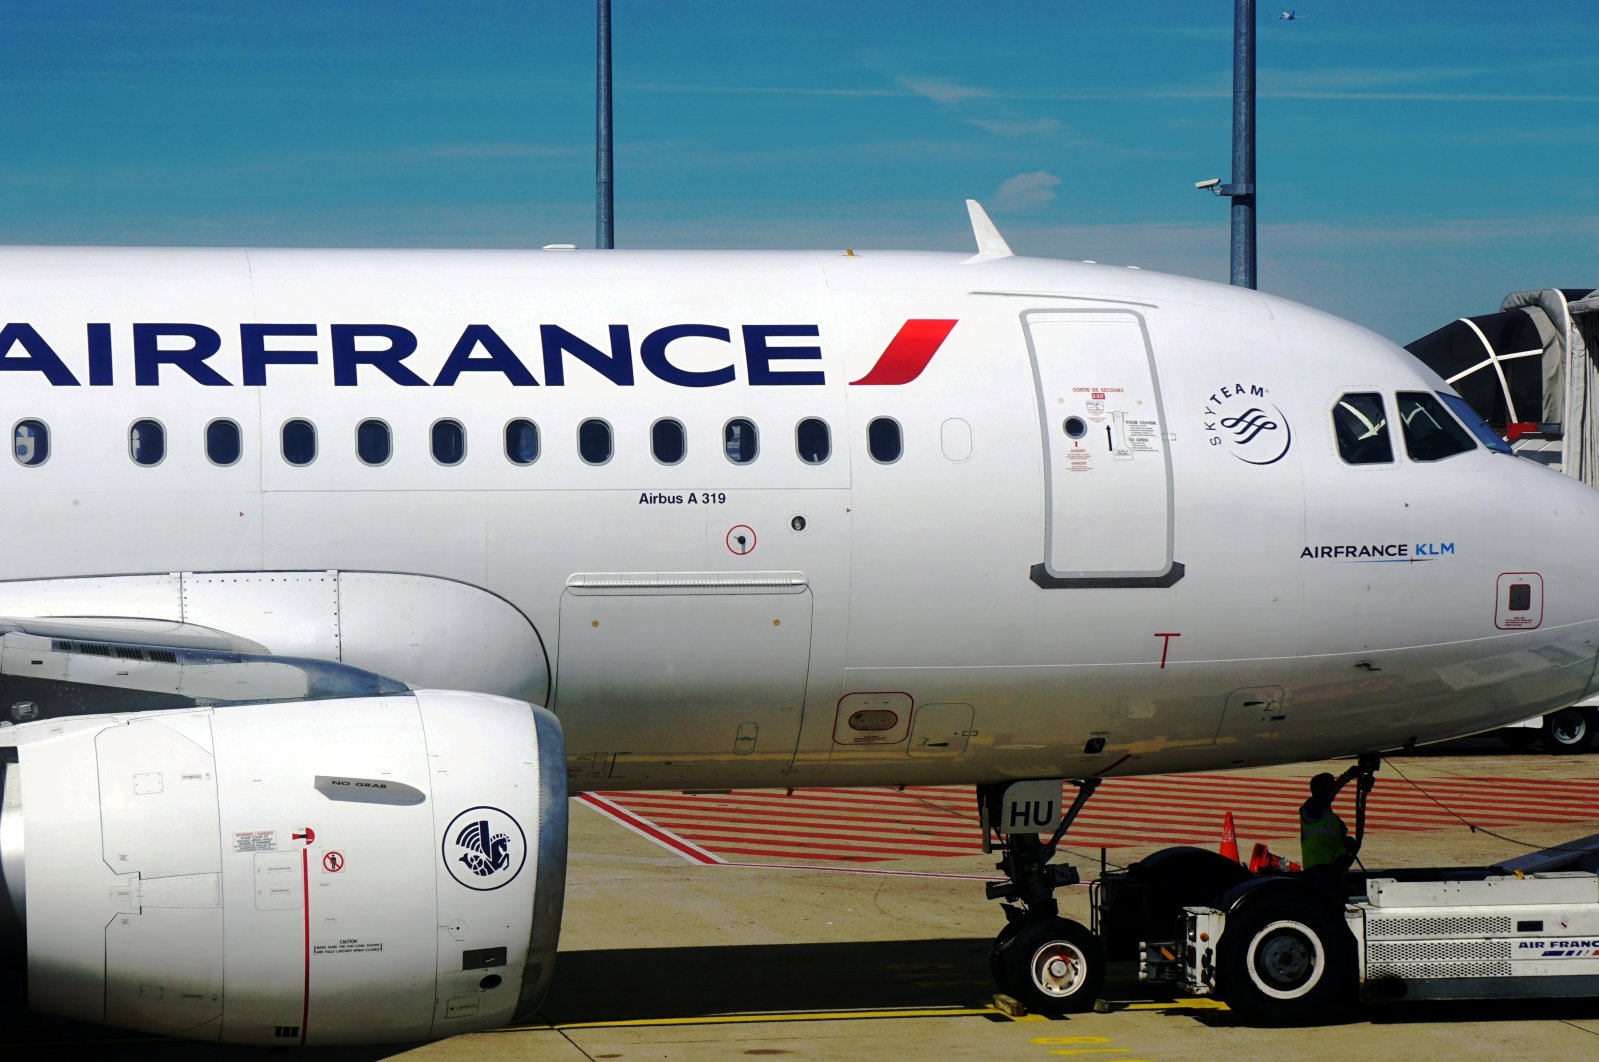 An Airbus A319 jet airplane from Air France KLM (AF) is parked at the gate at the Roissy Charles de Gaulle International Airport (CDG) near Paris, France, Aug. 10, 2015. (Shutterstock Photo)